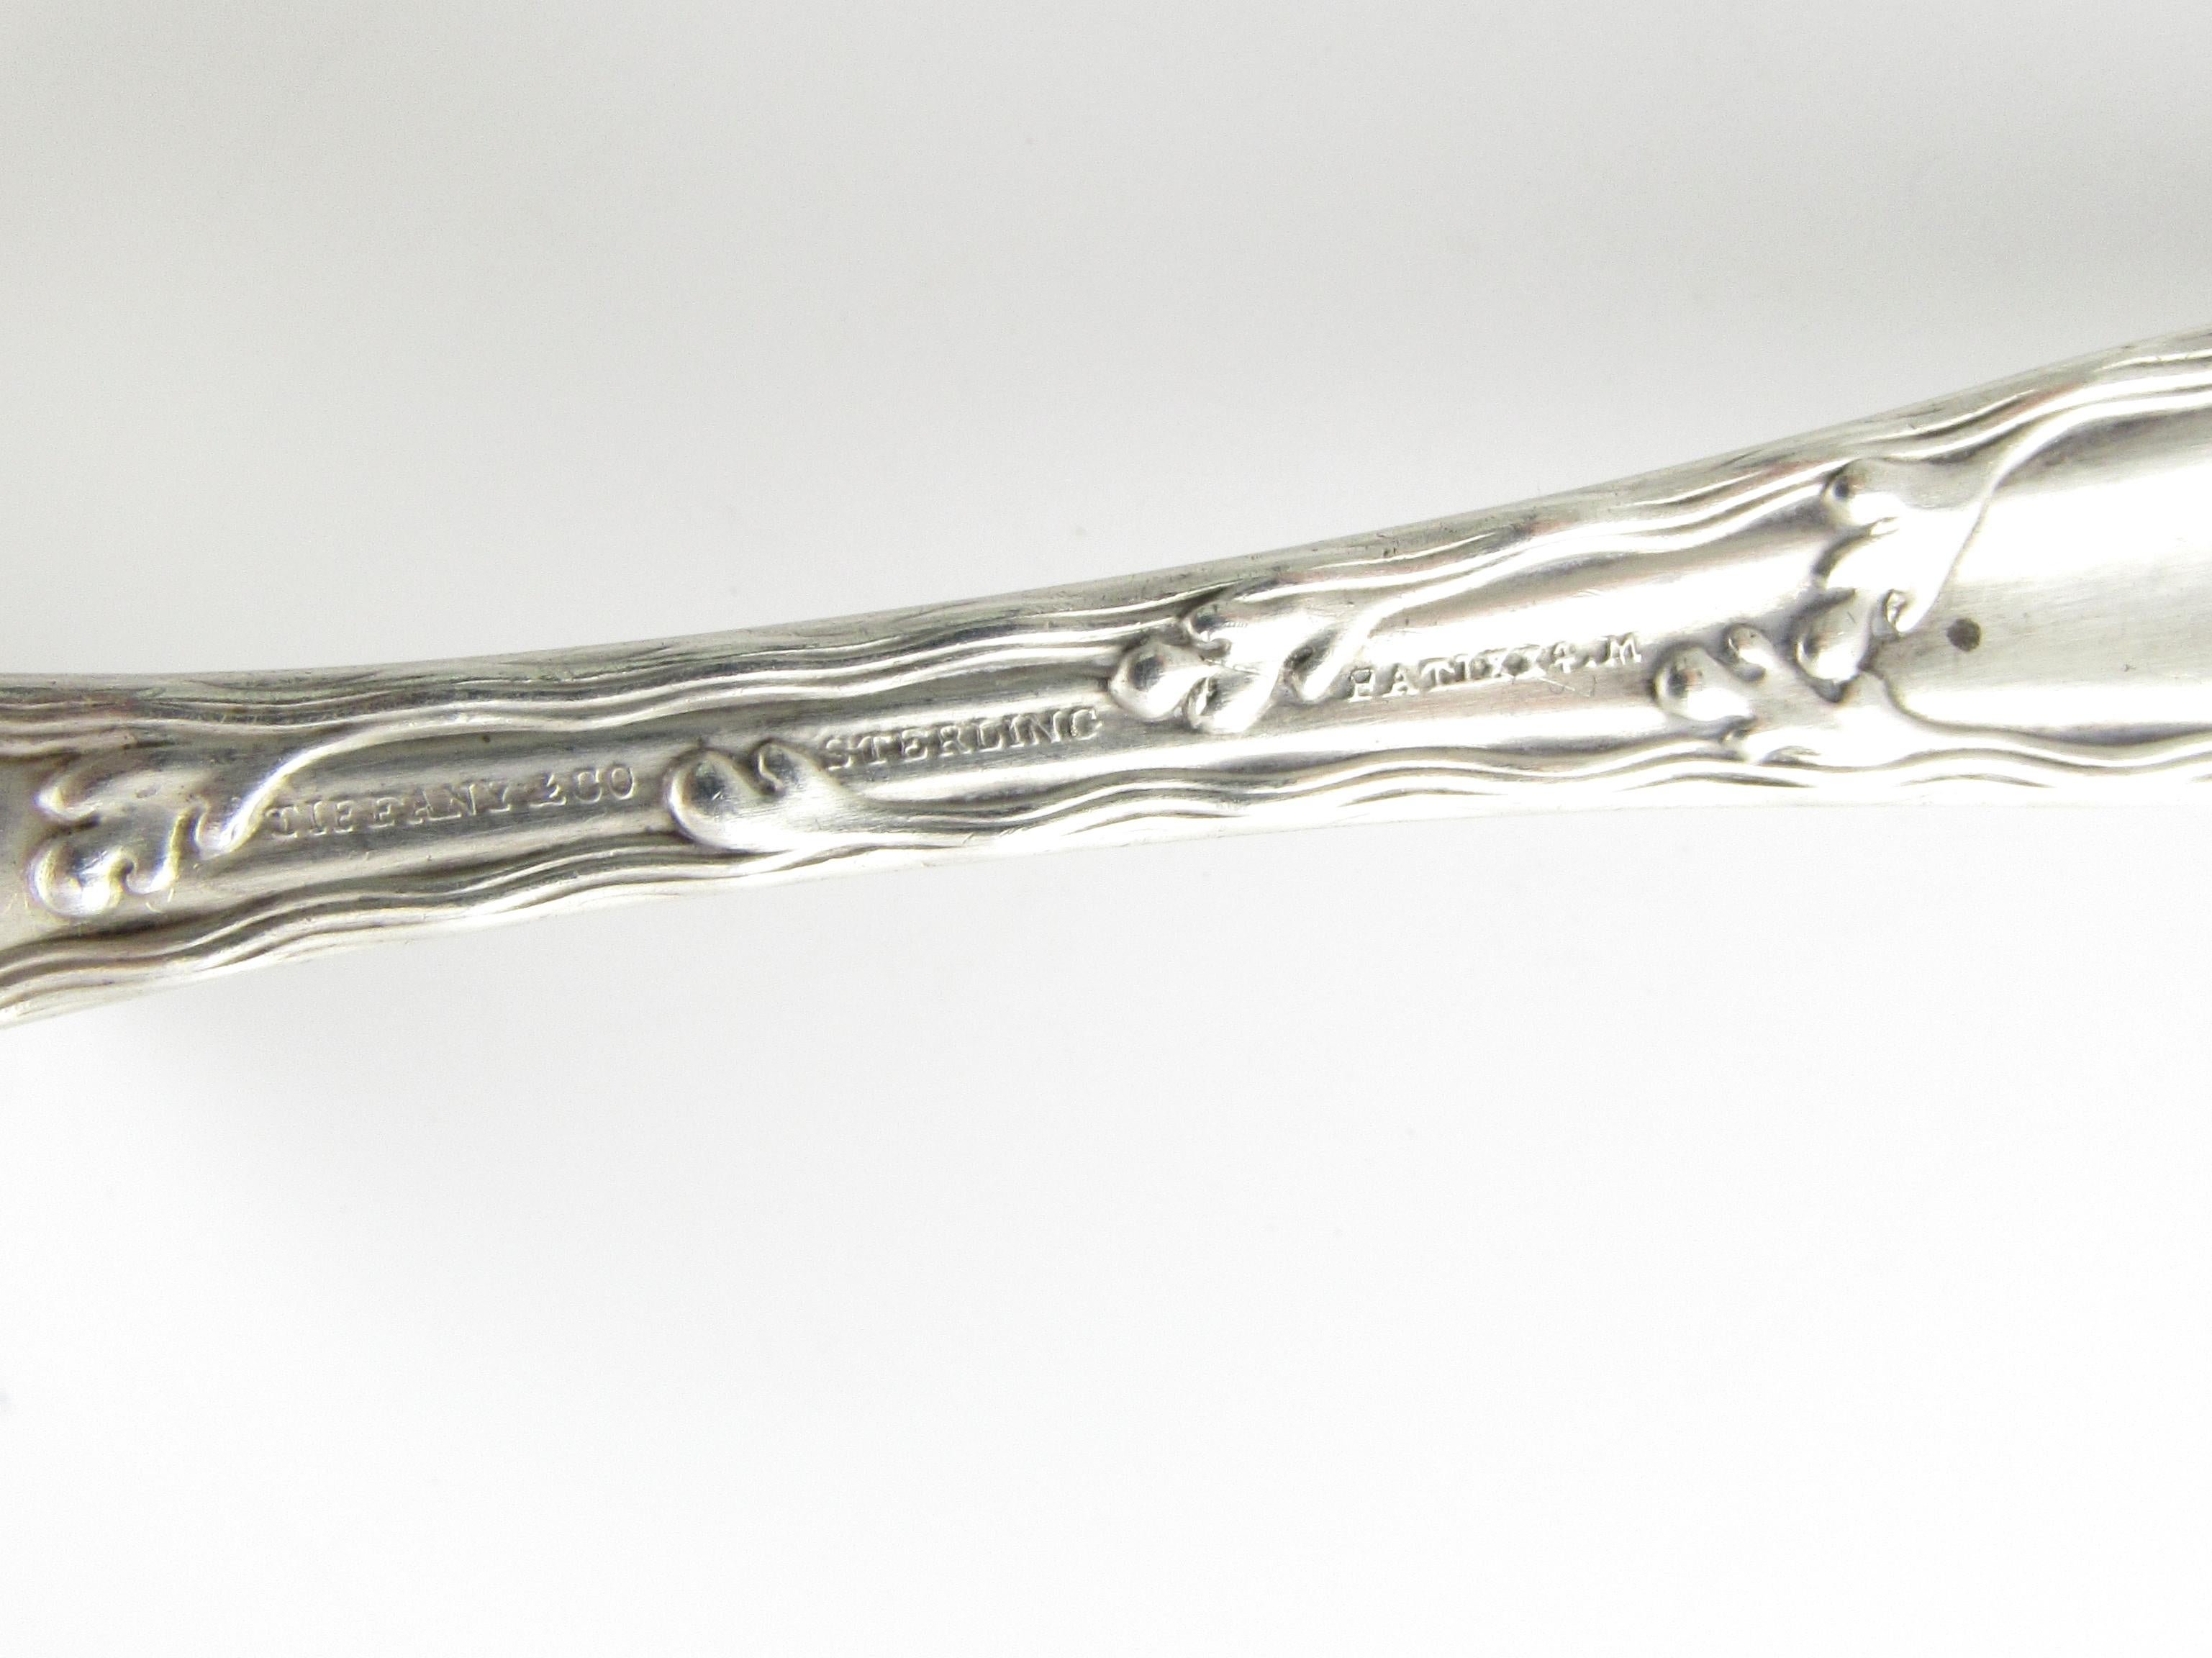 Tiffany & Co. Wave Edge Sterling Silver Ladle with Monogram 3